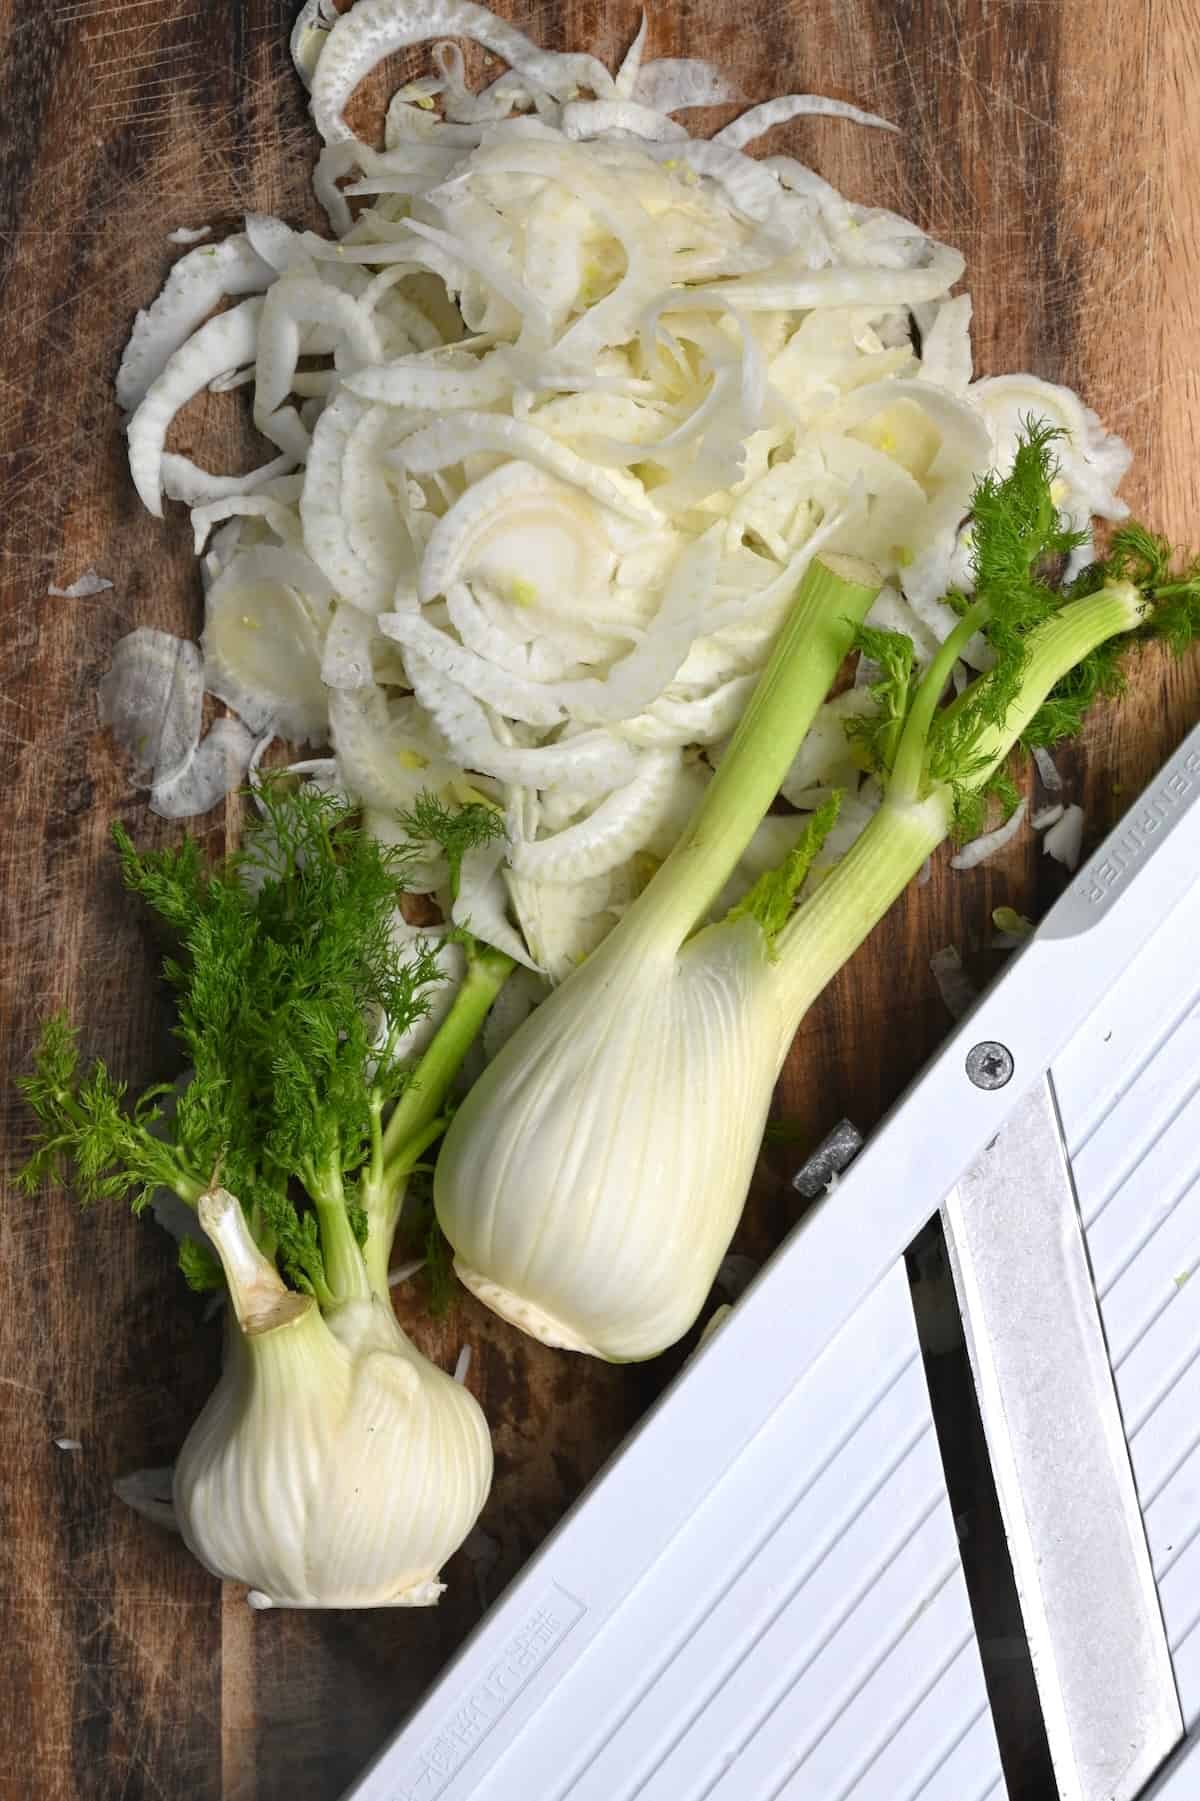 Shaved fennel and a mandoline